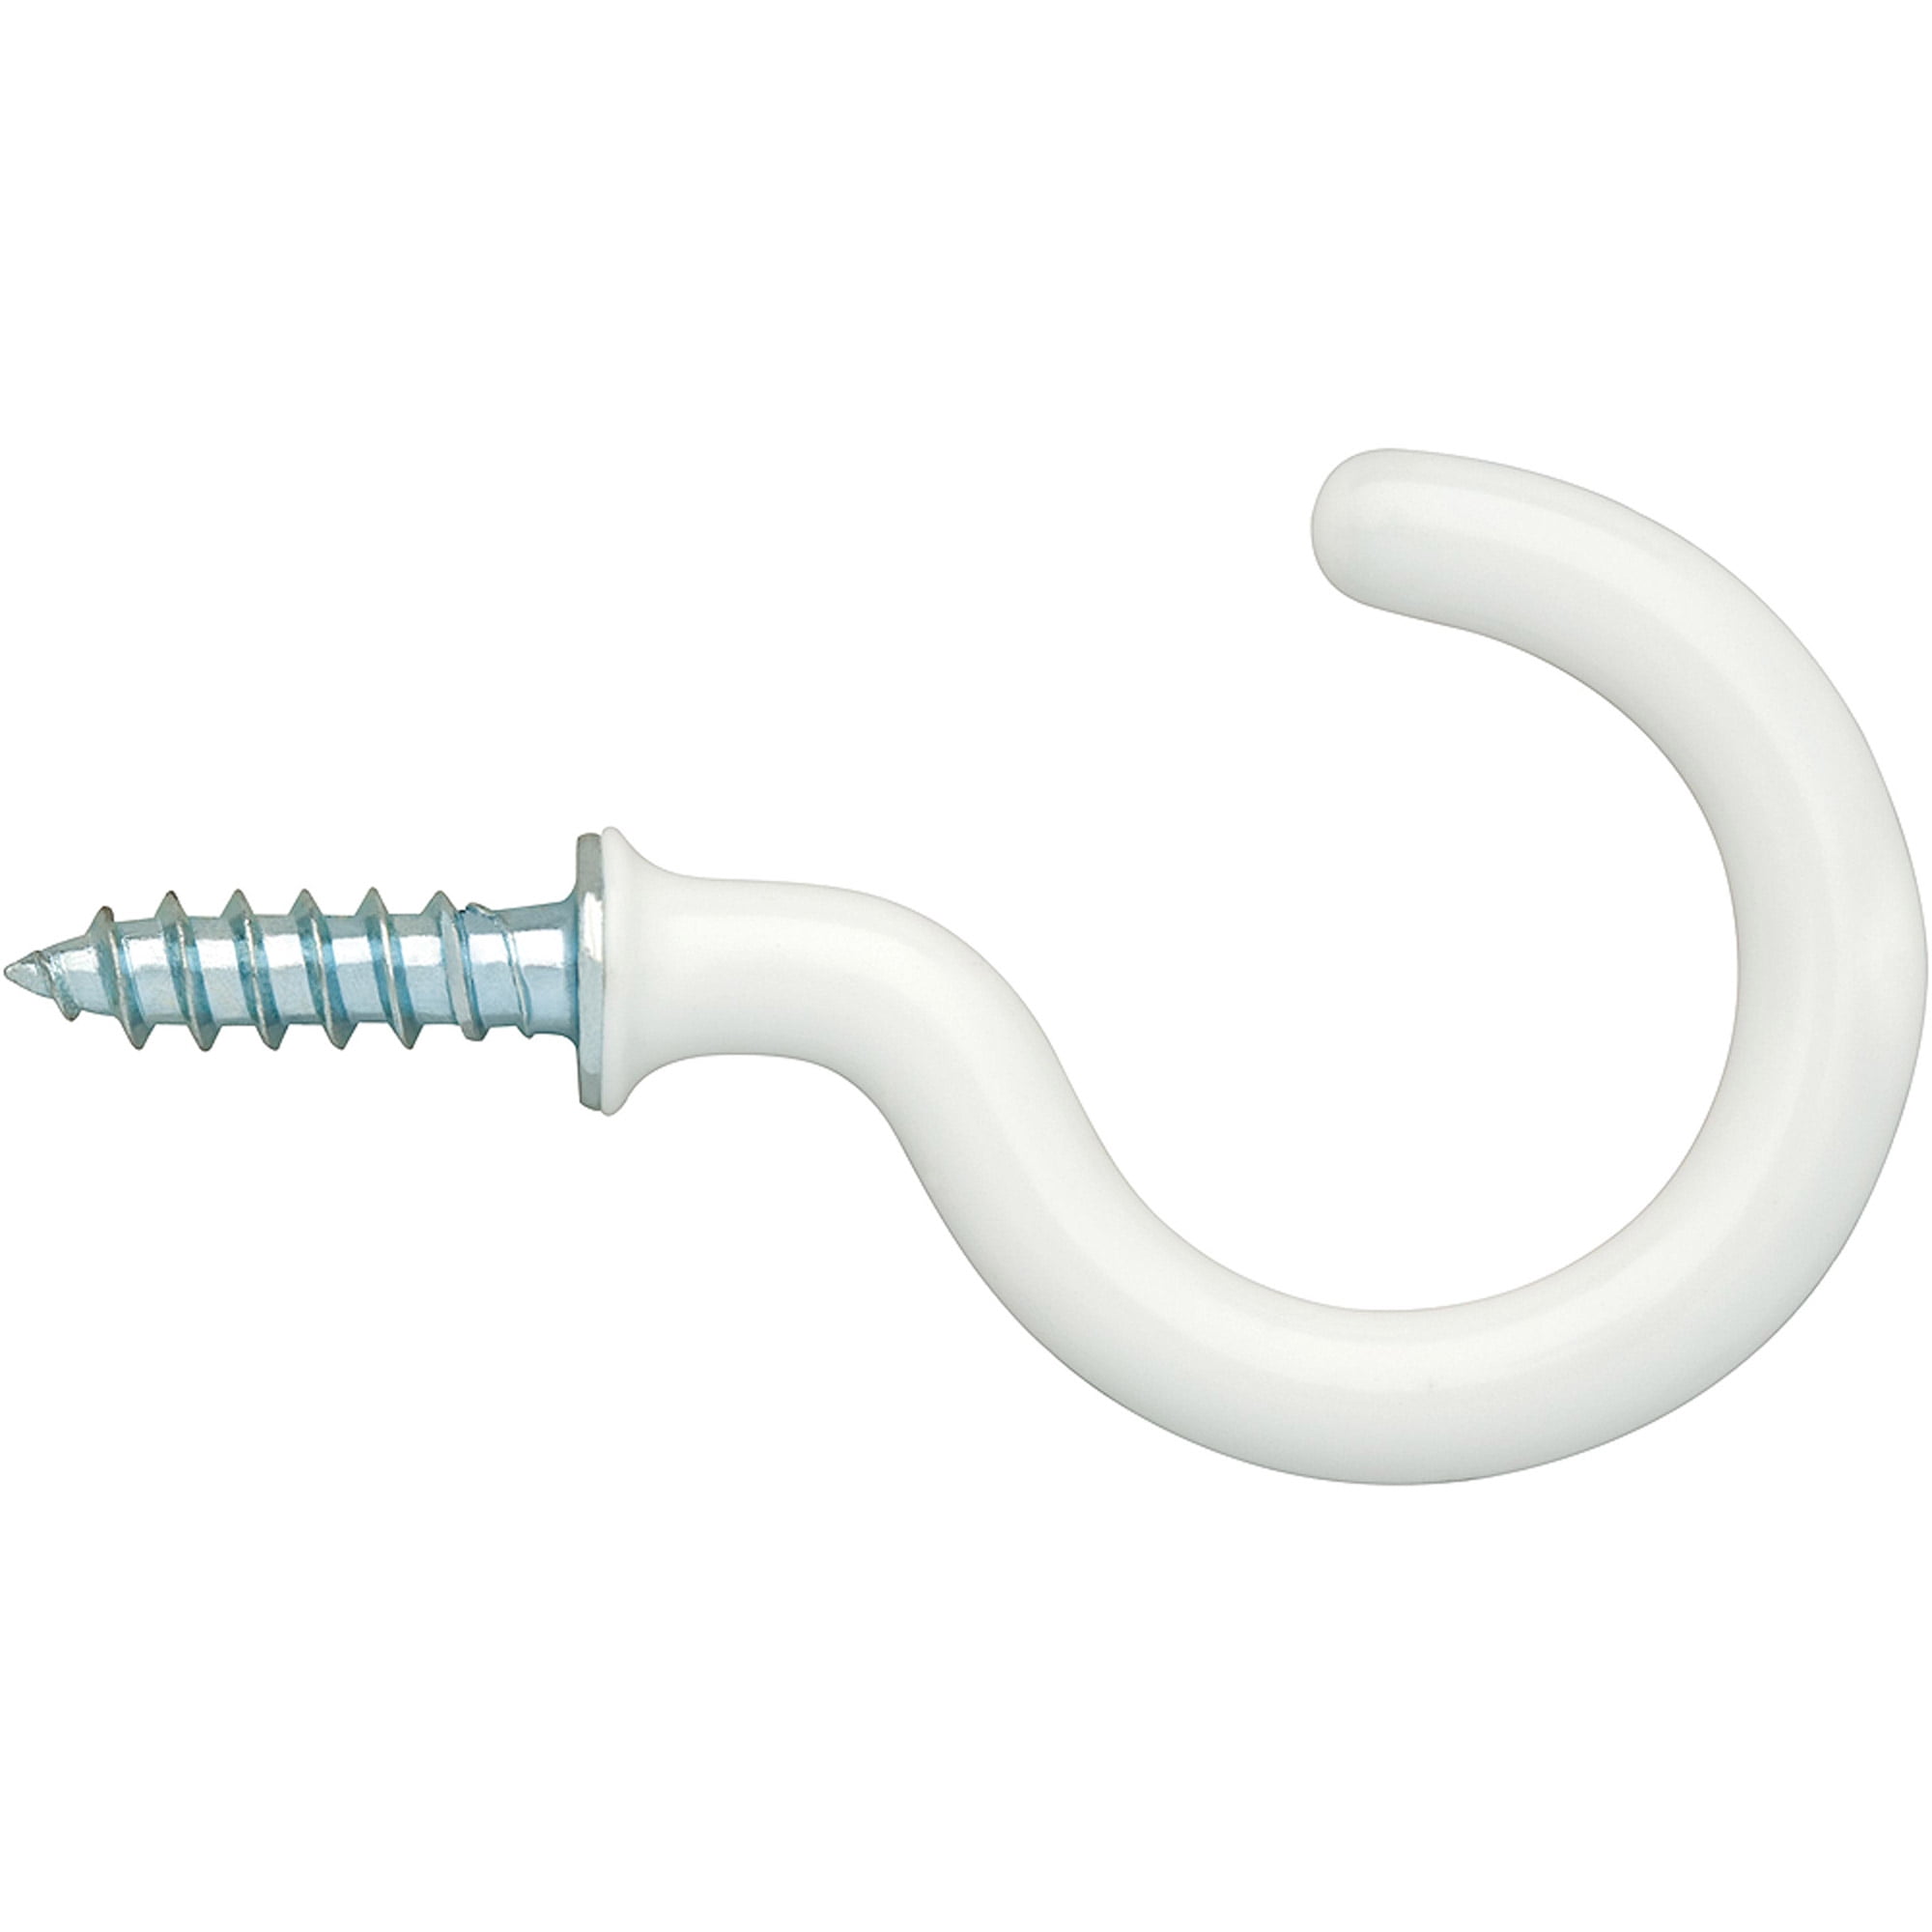 * 12 PK OF SHOULDERED WHITE CUP HOOKS ALL SIZES 